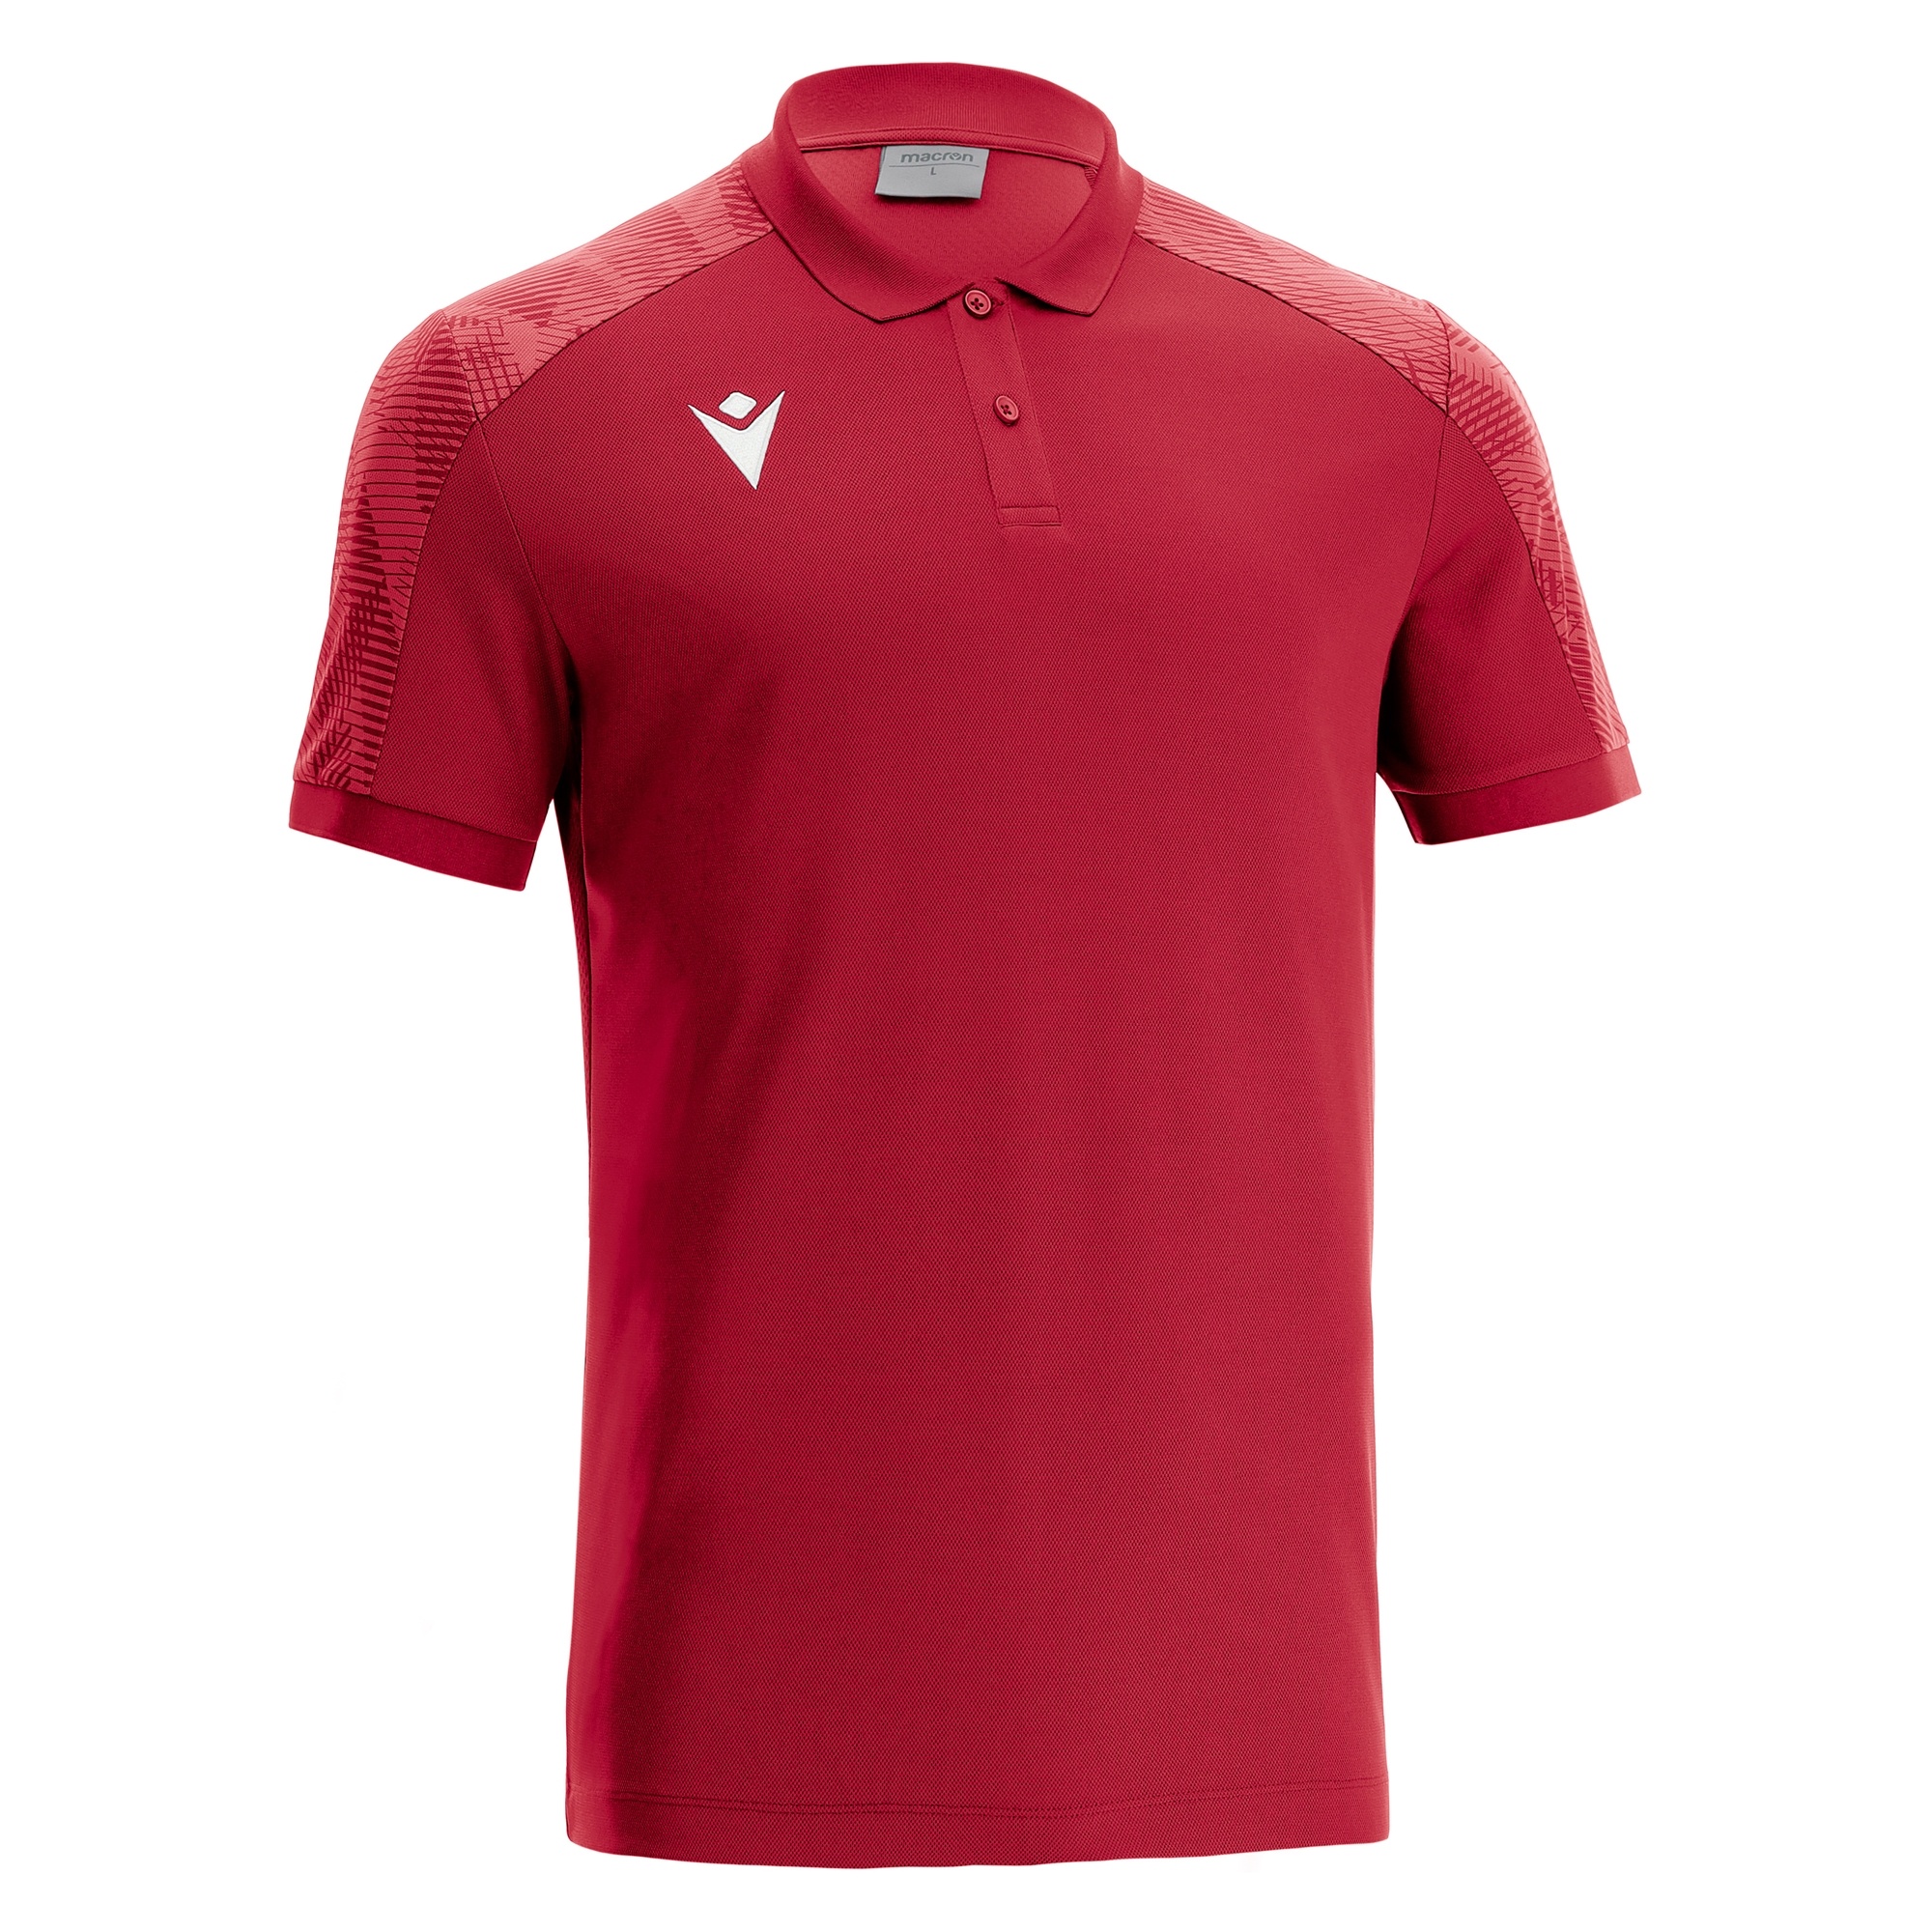 ROCK POLO RED/DRED ,XXL Macron.rs